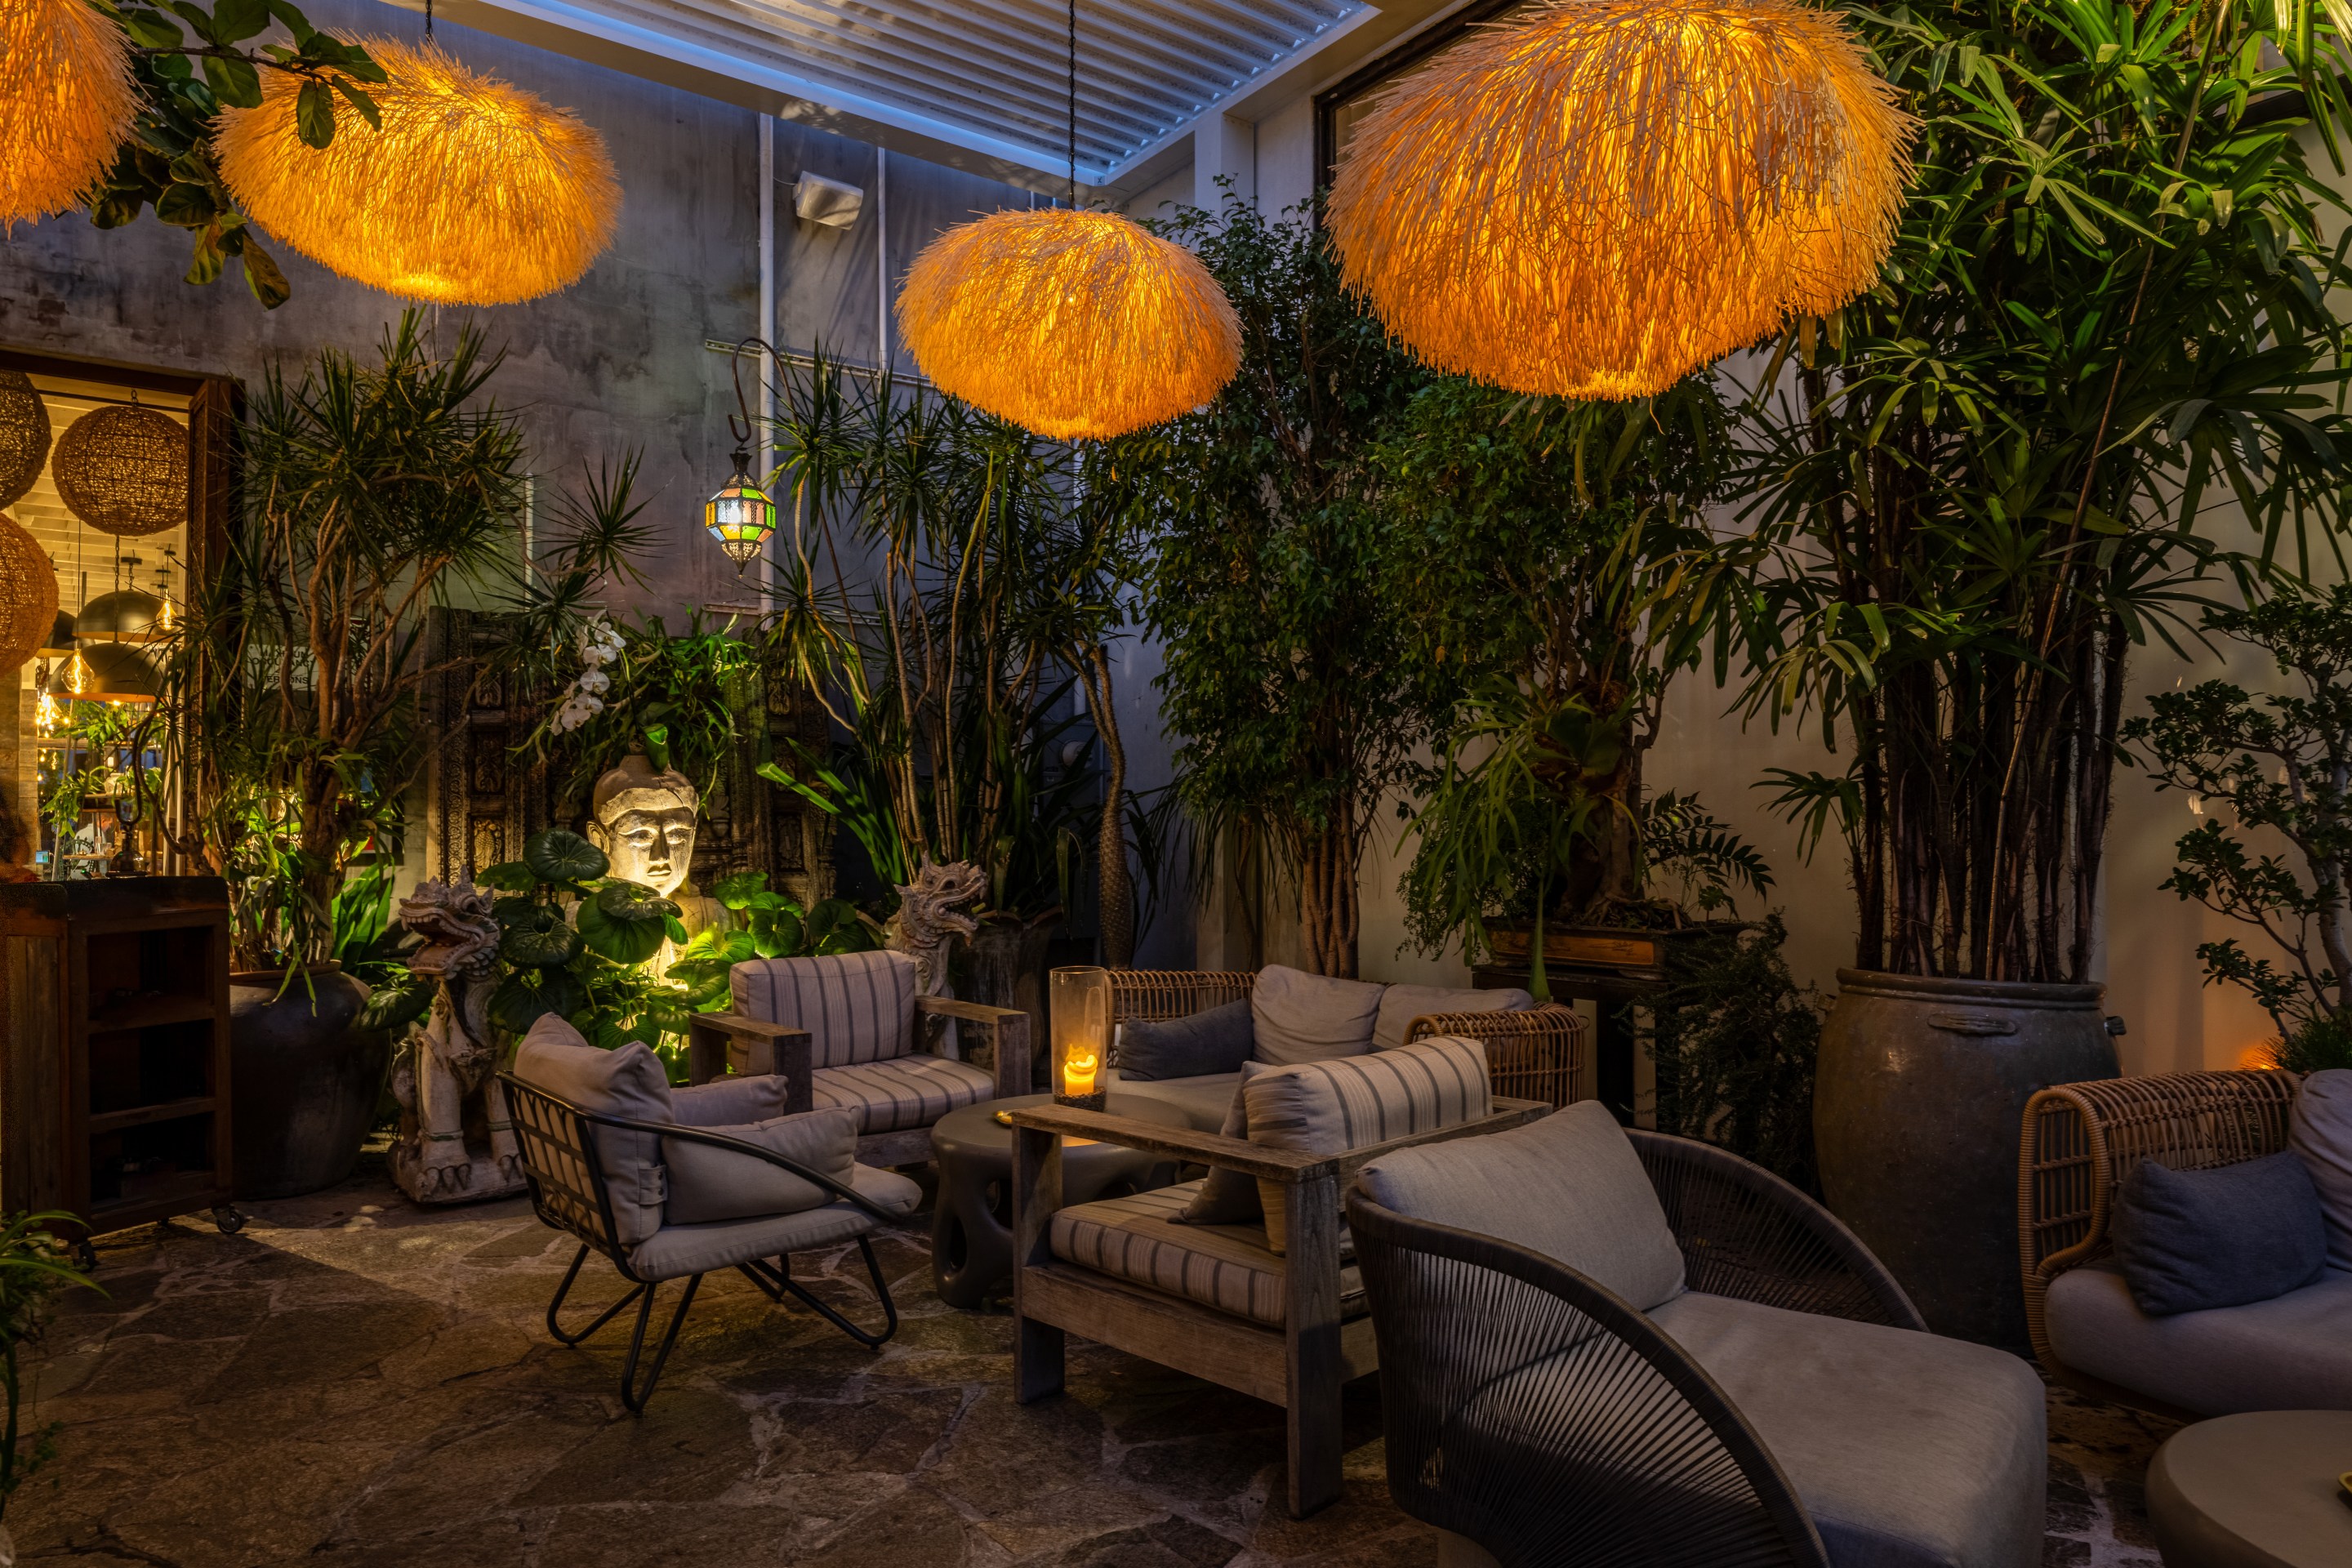 An outdoor area of The Woods dispensary and consumption lounge, showing lit up chandeliers, Buddha heads, and chaise lounges